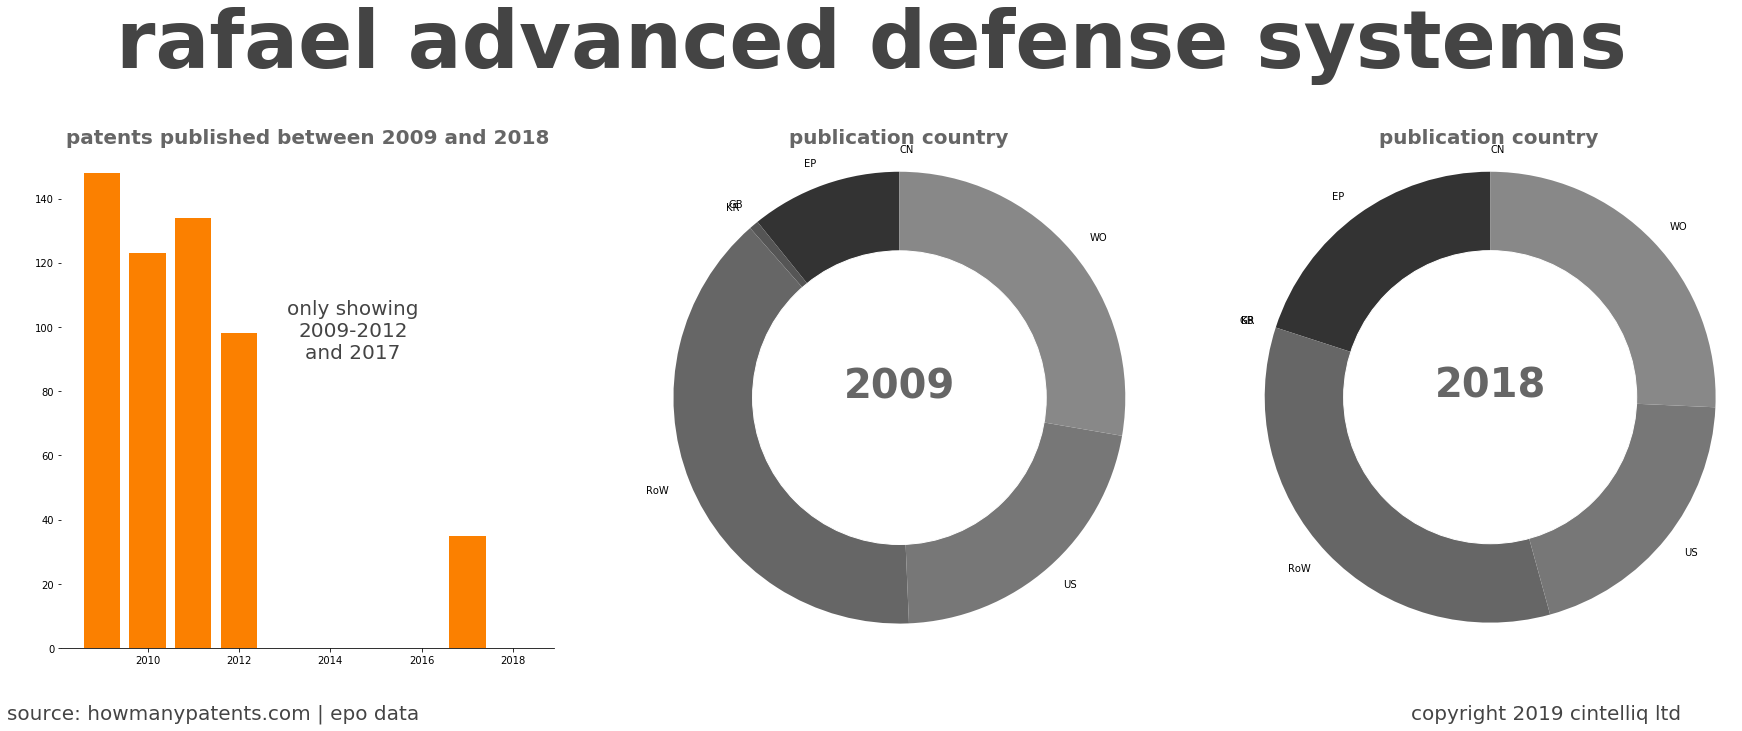 summary of patents for Rafael Advanced Defense Systems